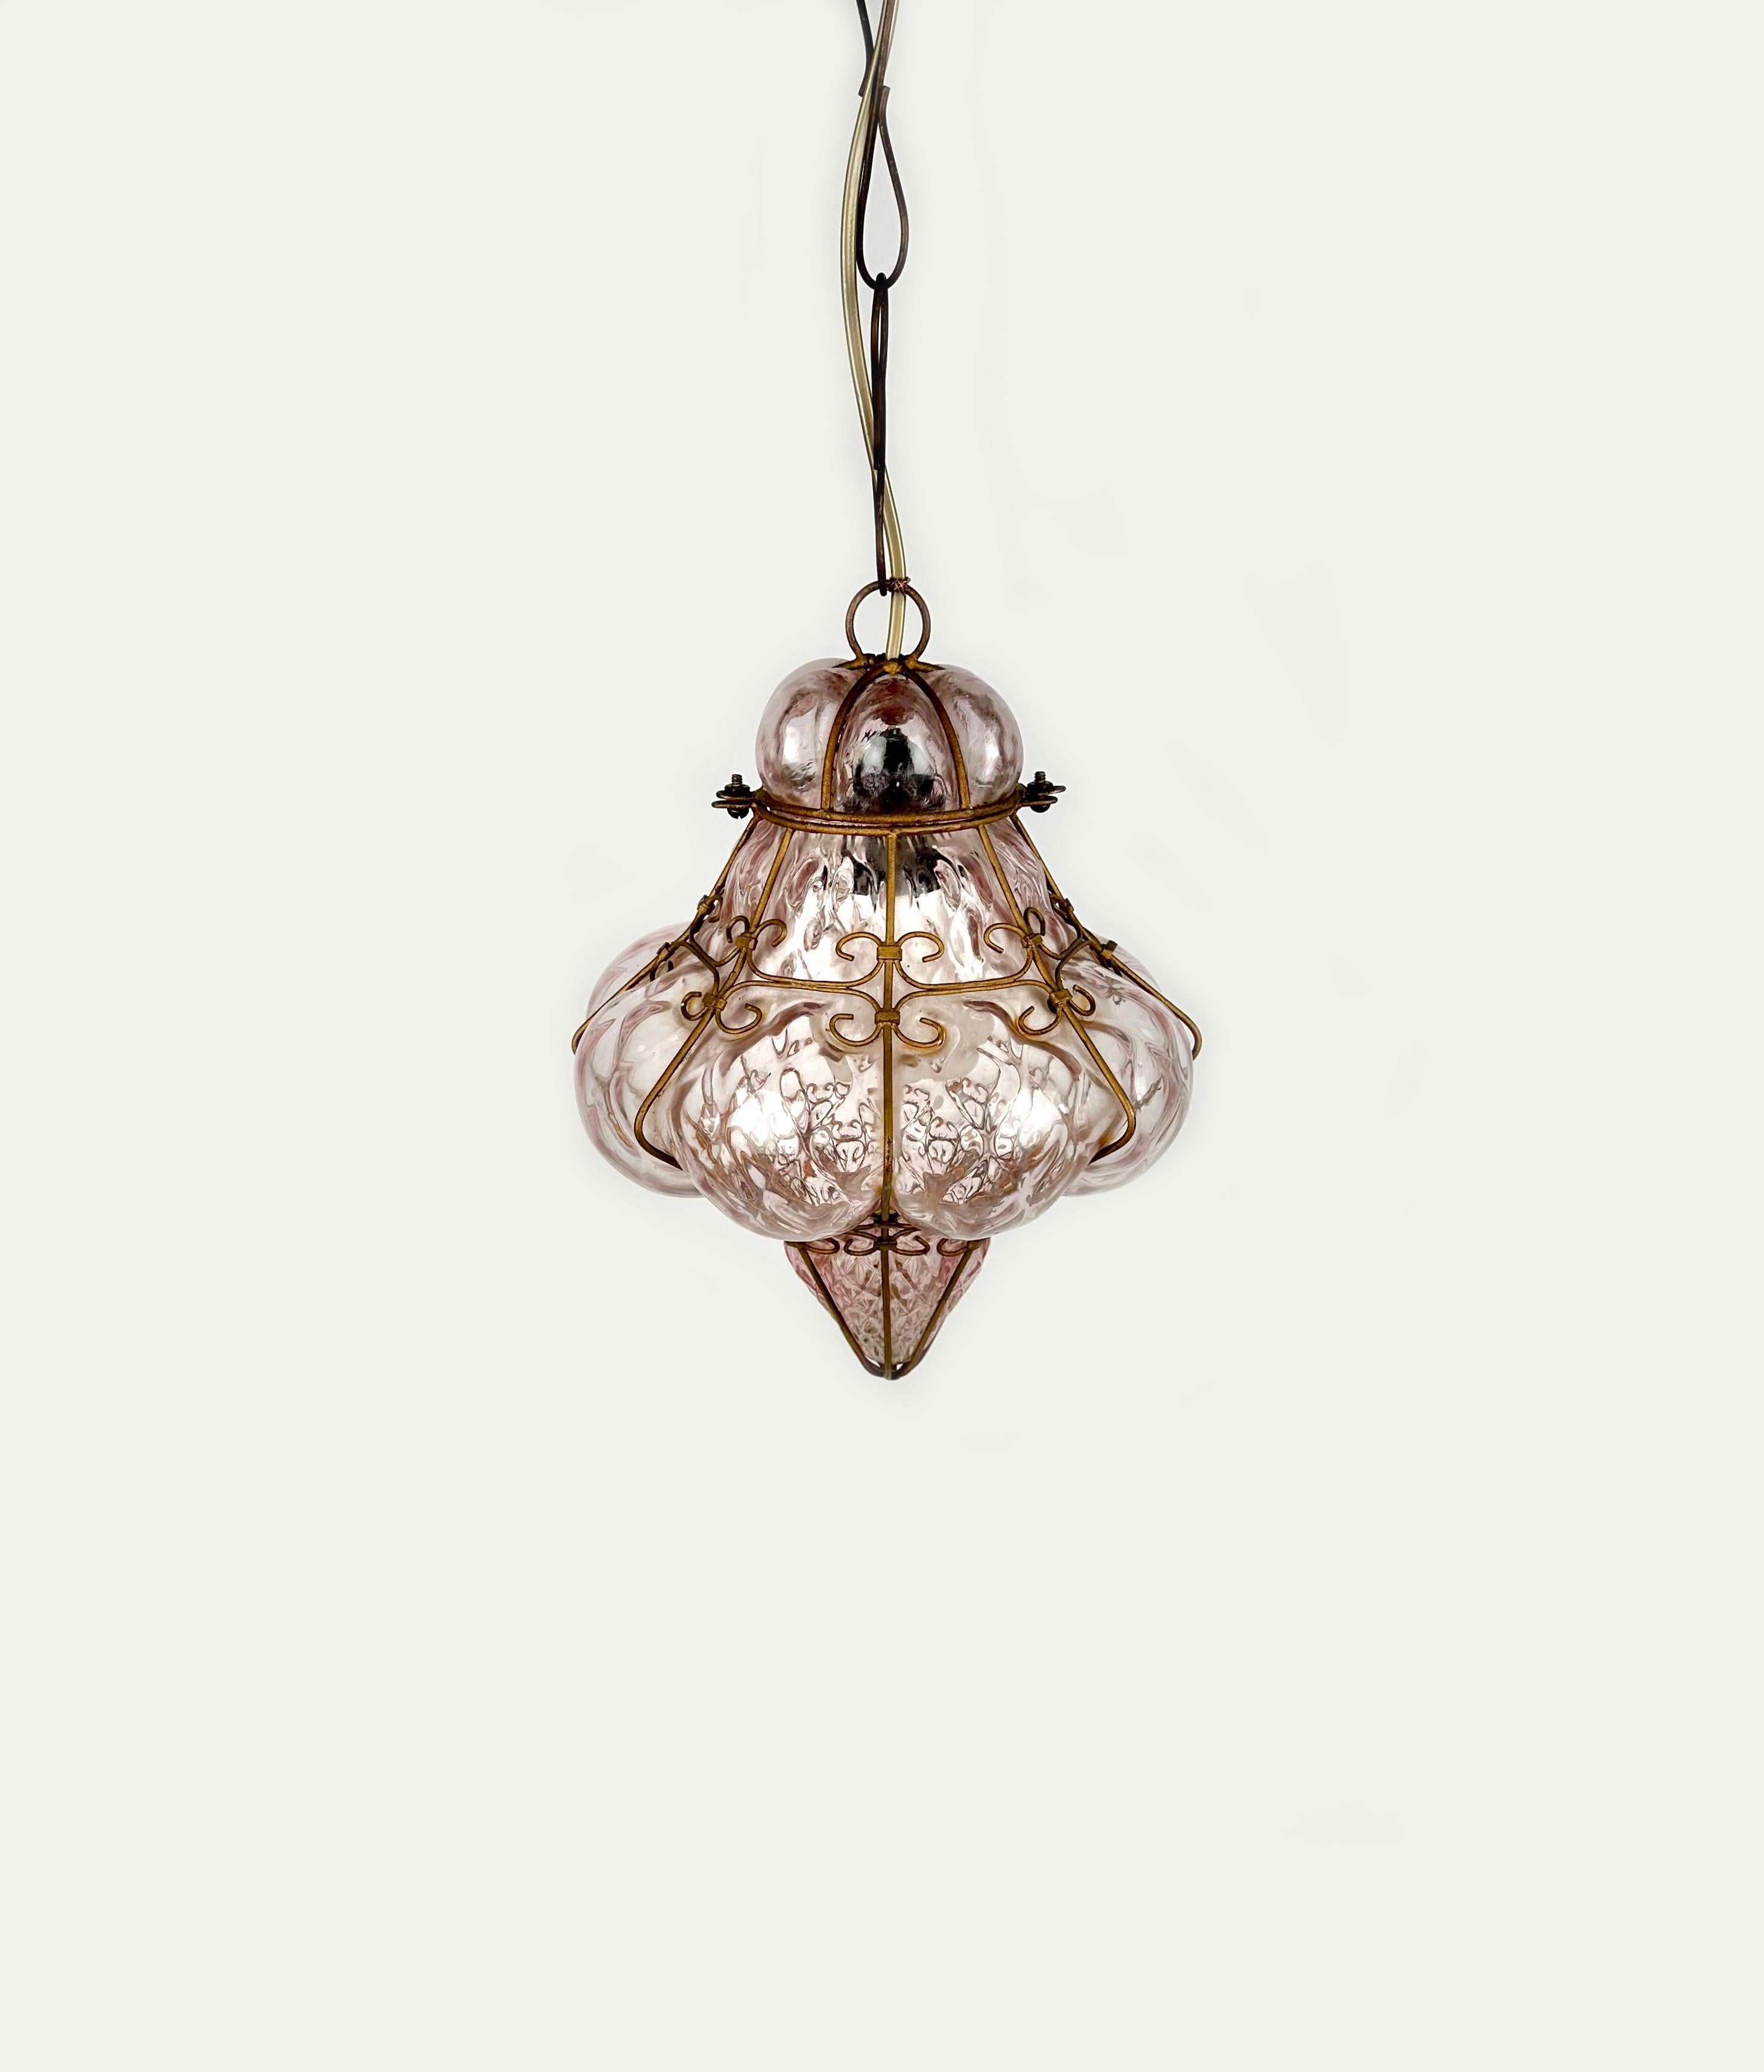 Metal Midcentury Handblown Murano Pink Glass Pendant Light by Seguso, Italy, 1940s For Sale